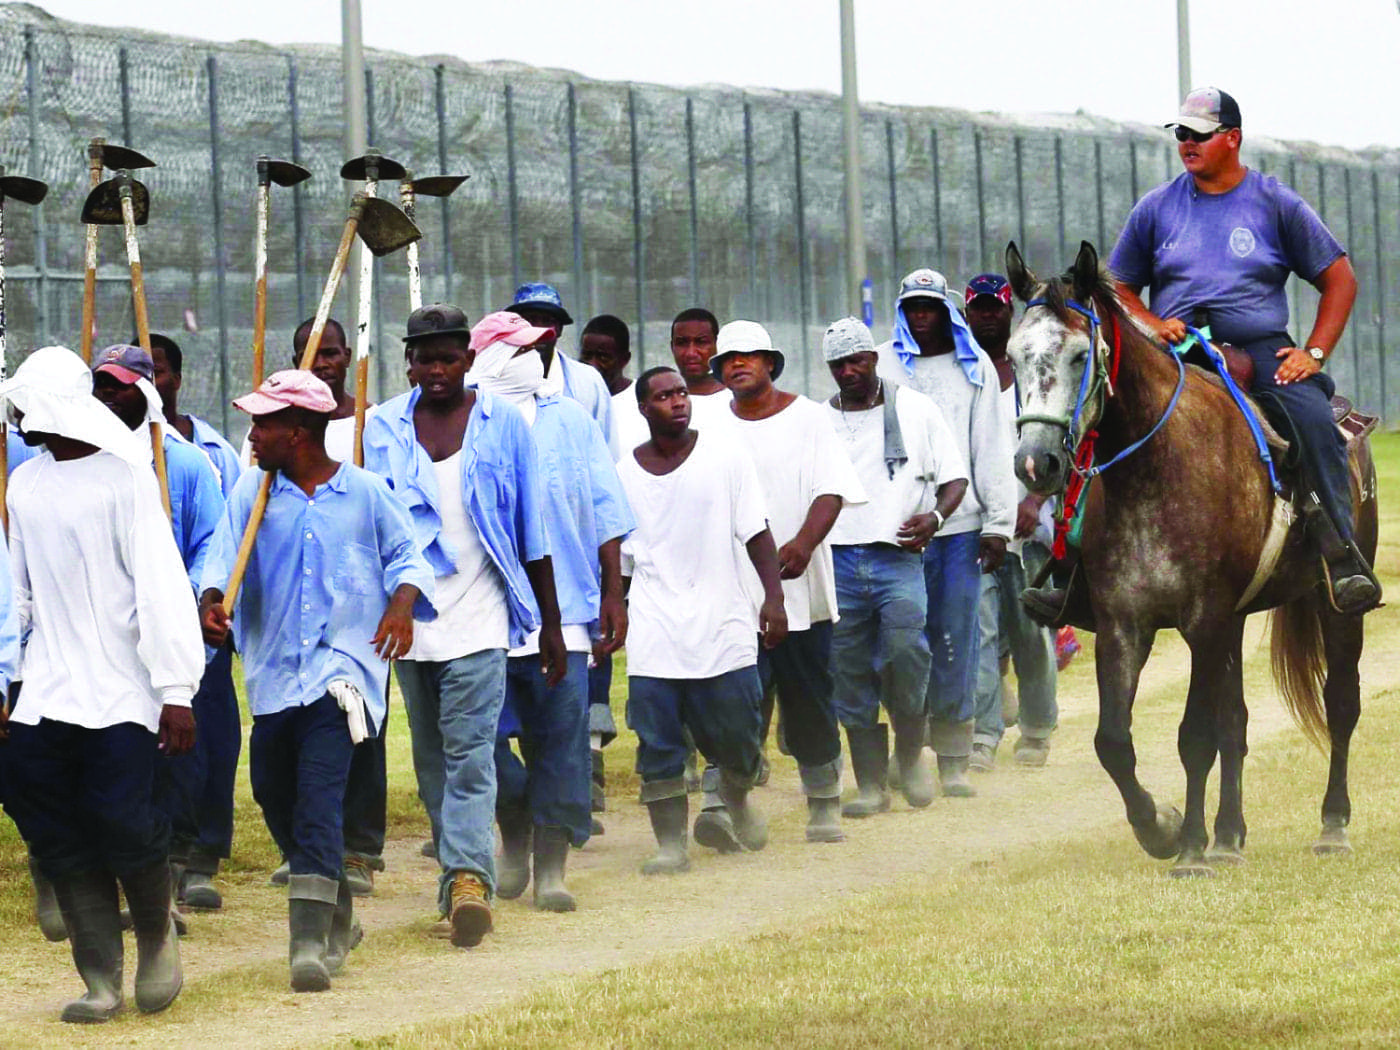 Angola-prisoners-hoe-squad-marched-back-after-day-of-farm-work-081811-by-Gerard-Herbert-AP-1400x1050, Imprisoned in ‘Sundown Towns’: The racial politics of my domestic exile, Abolition Now! 